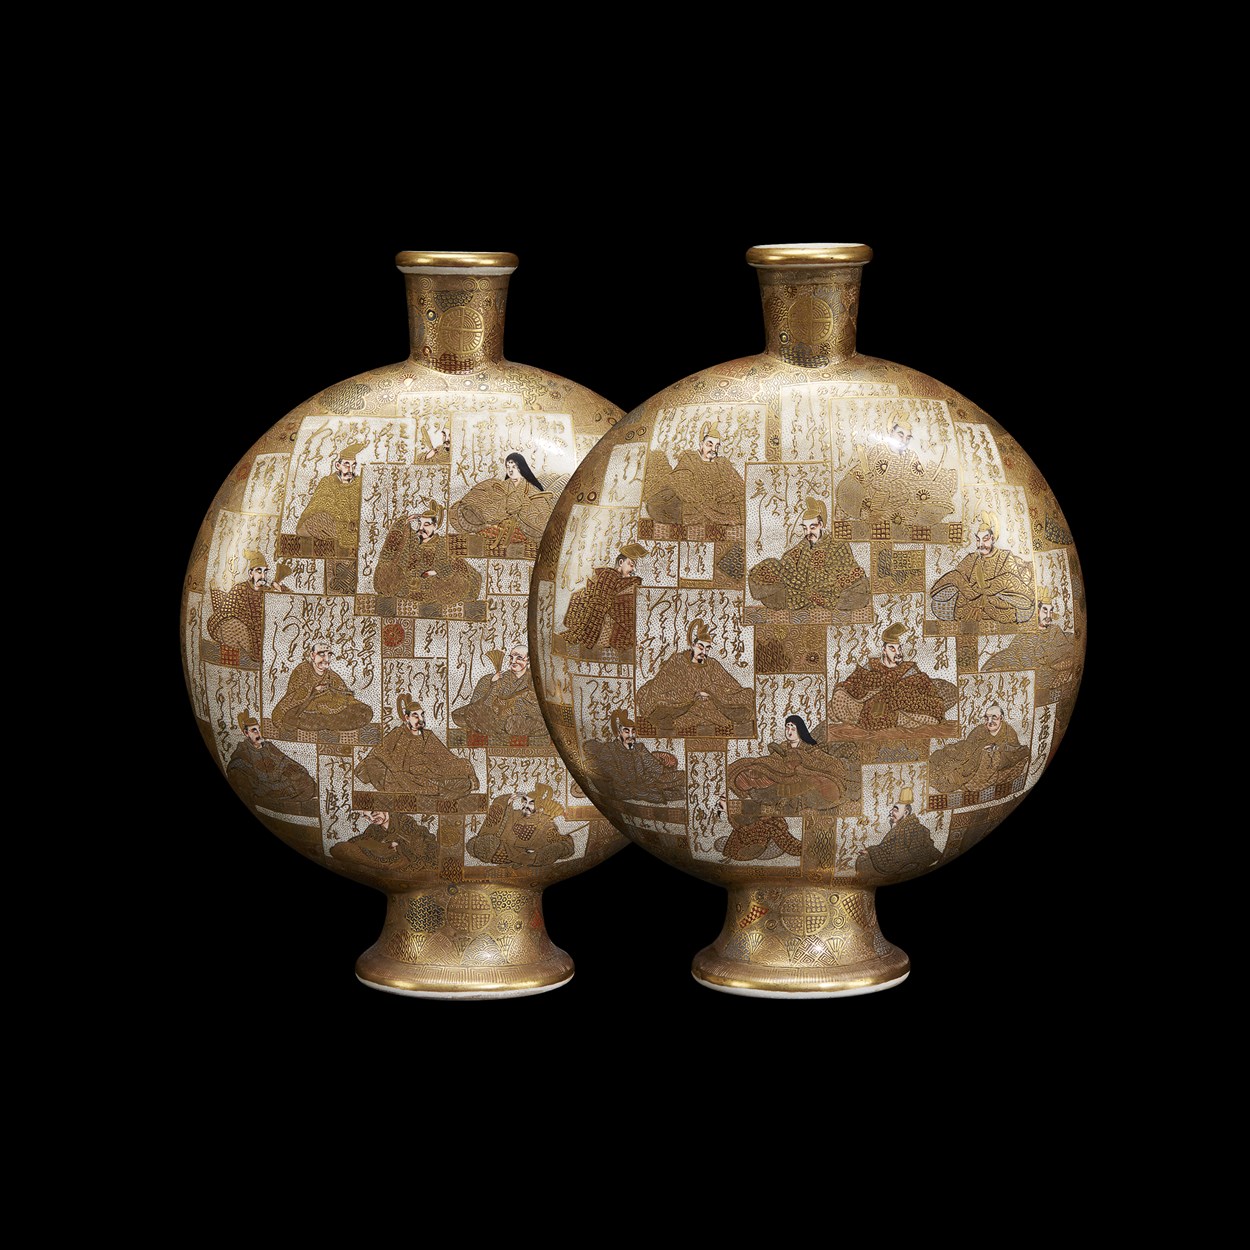 Lot 94 - A pair of Satsuma pottery "moon flask" vases, decorated with poet cards